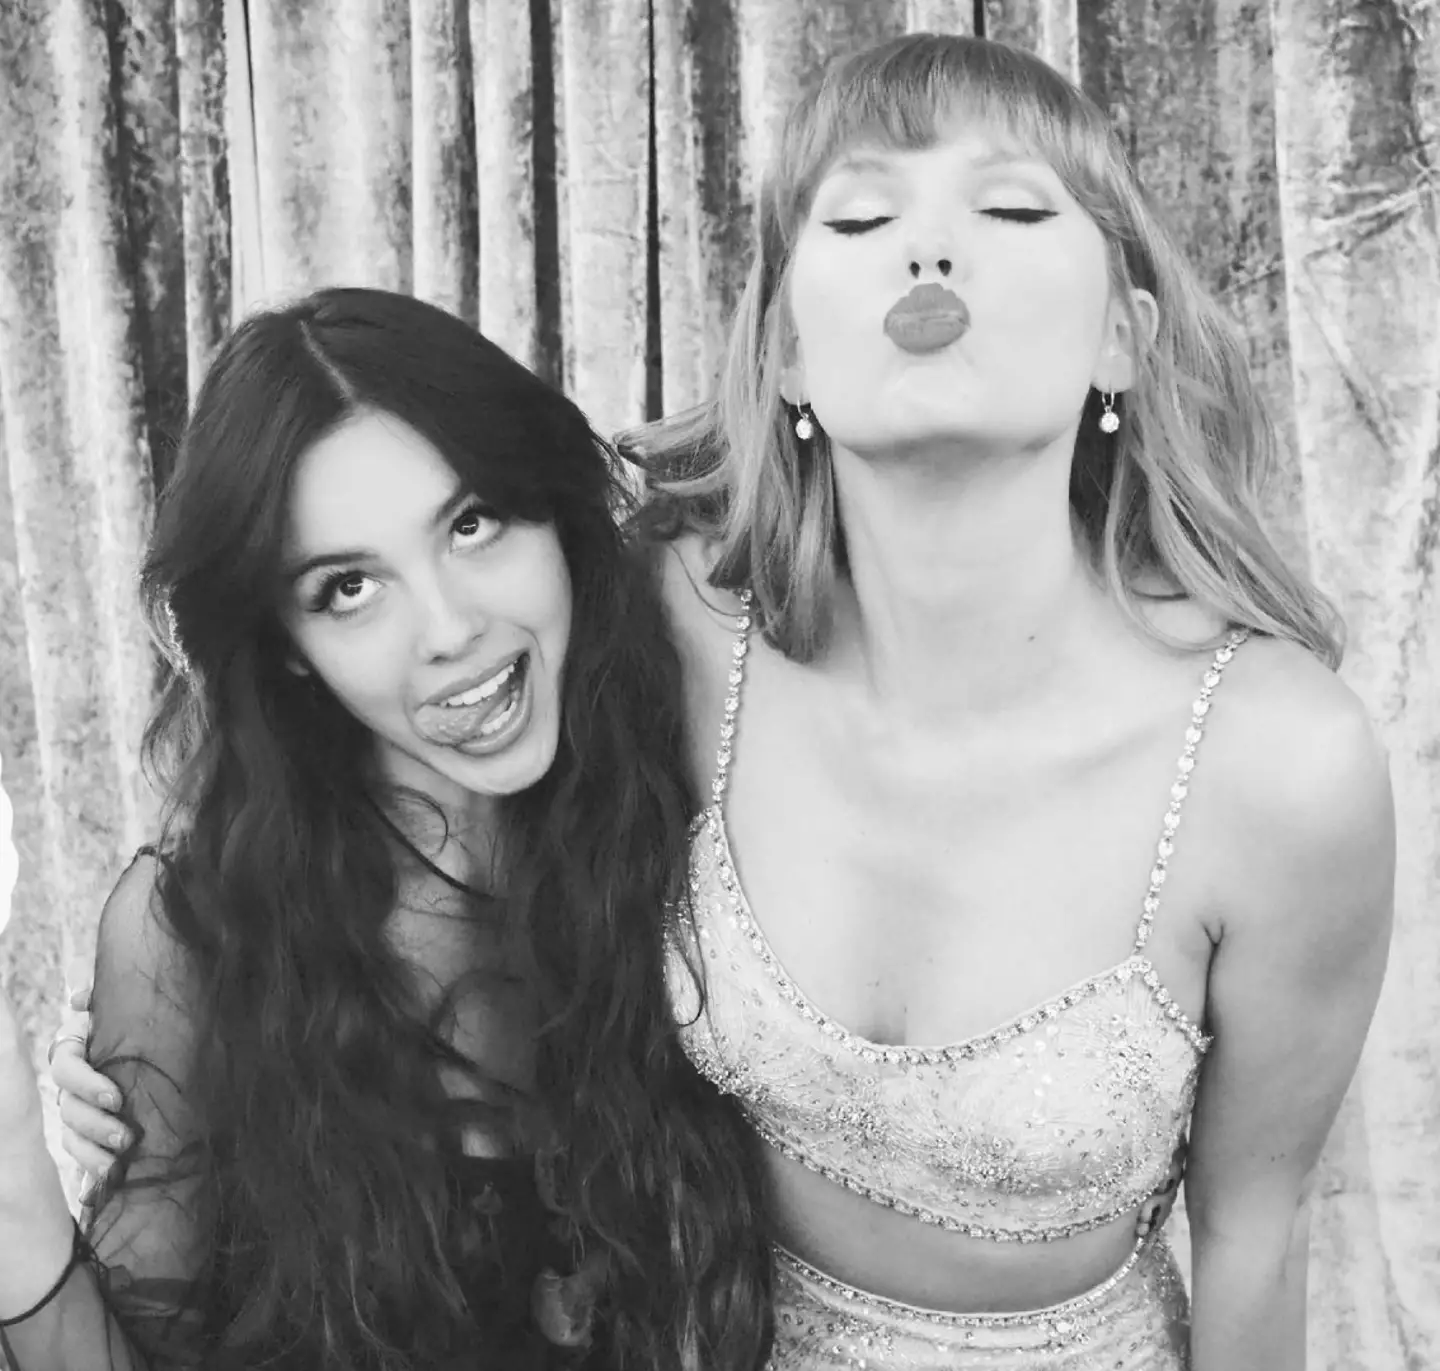 Fans claim that Olivia and Taylor have 'fallen out' over a supposed song crediting issue.